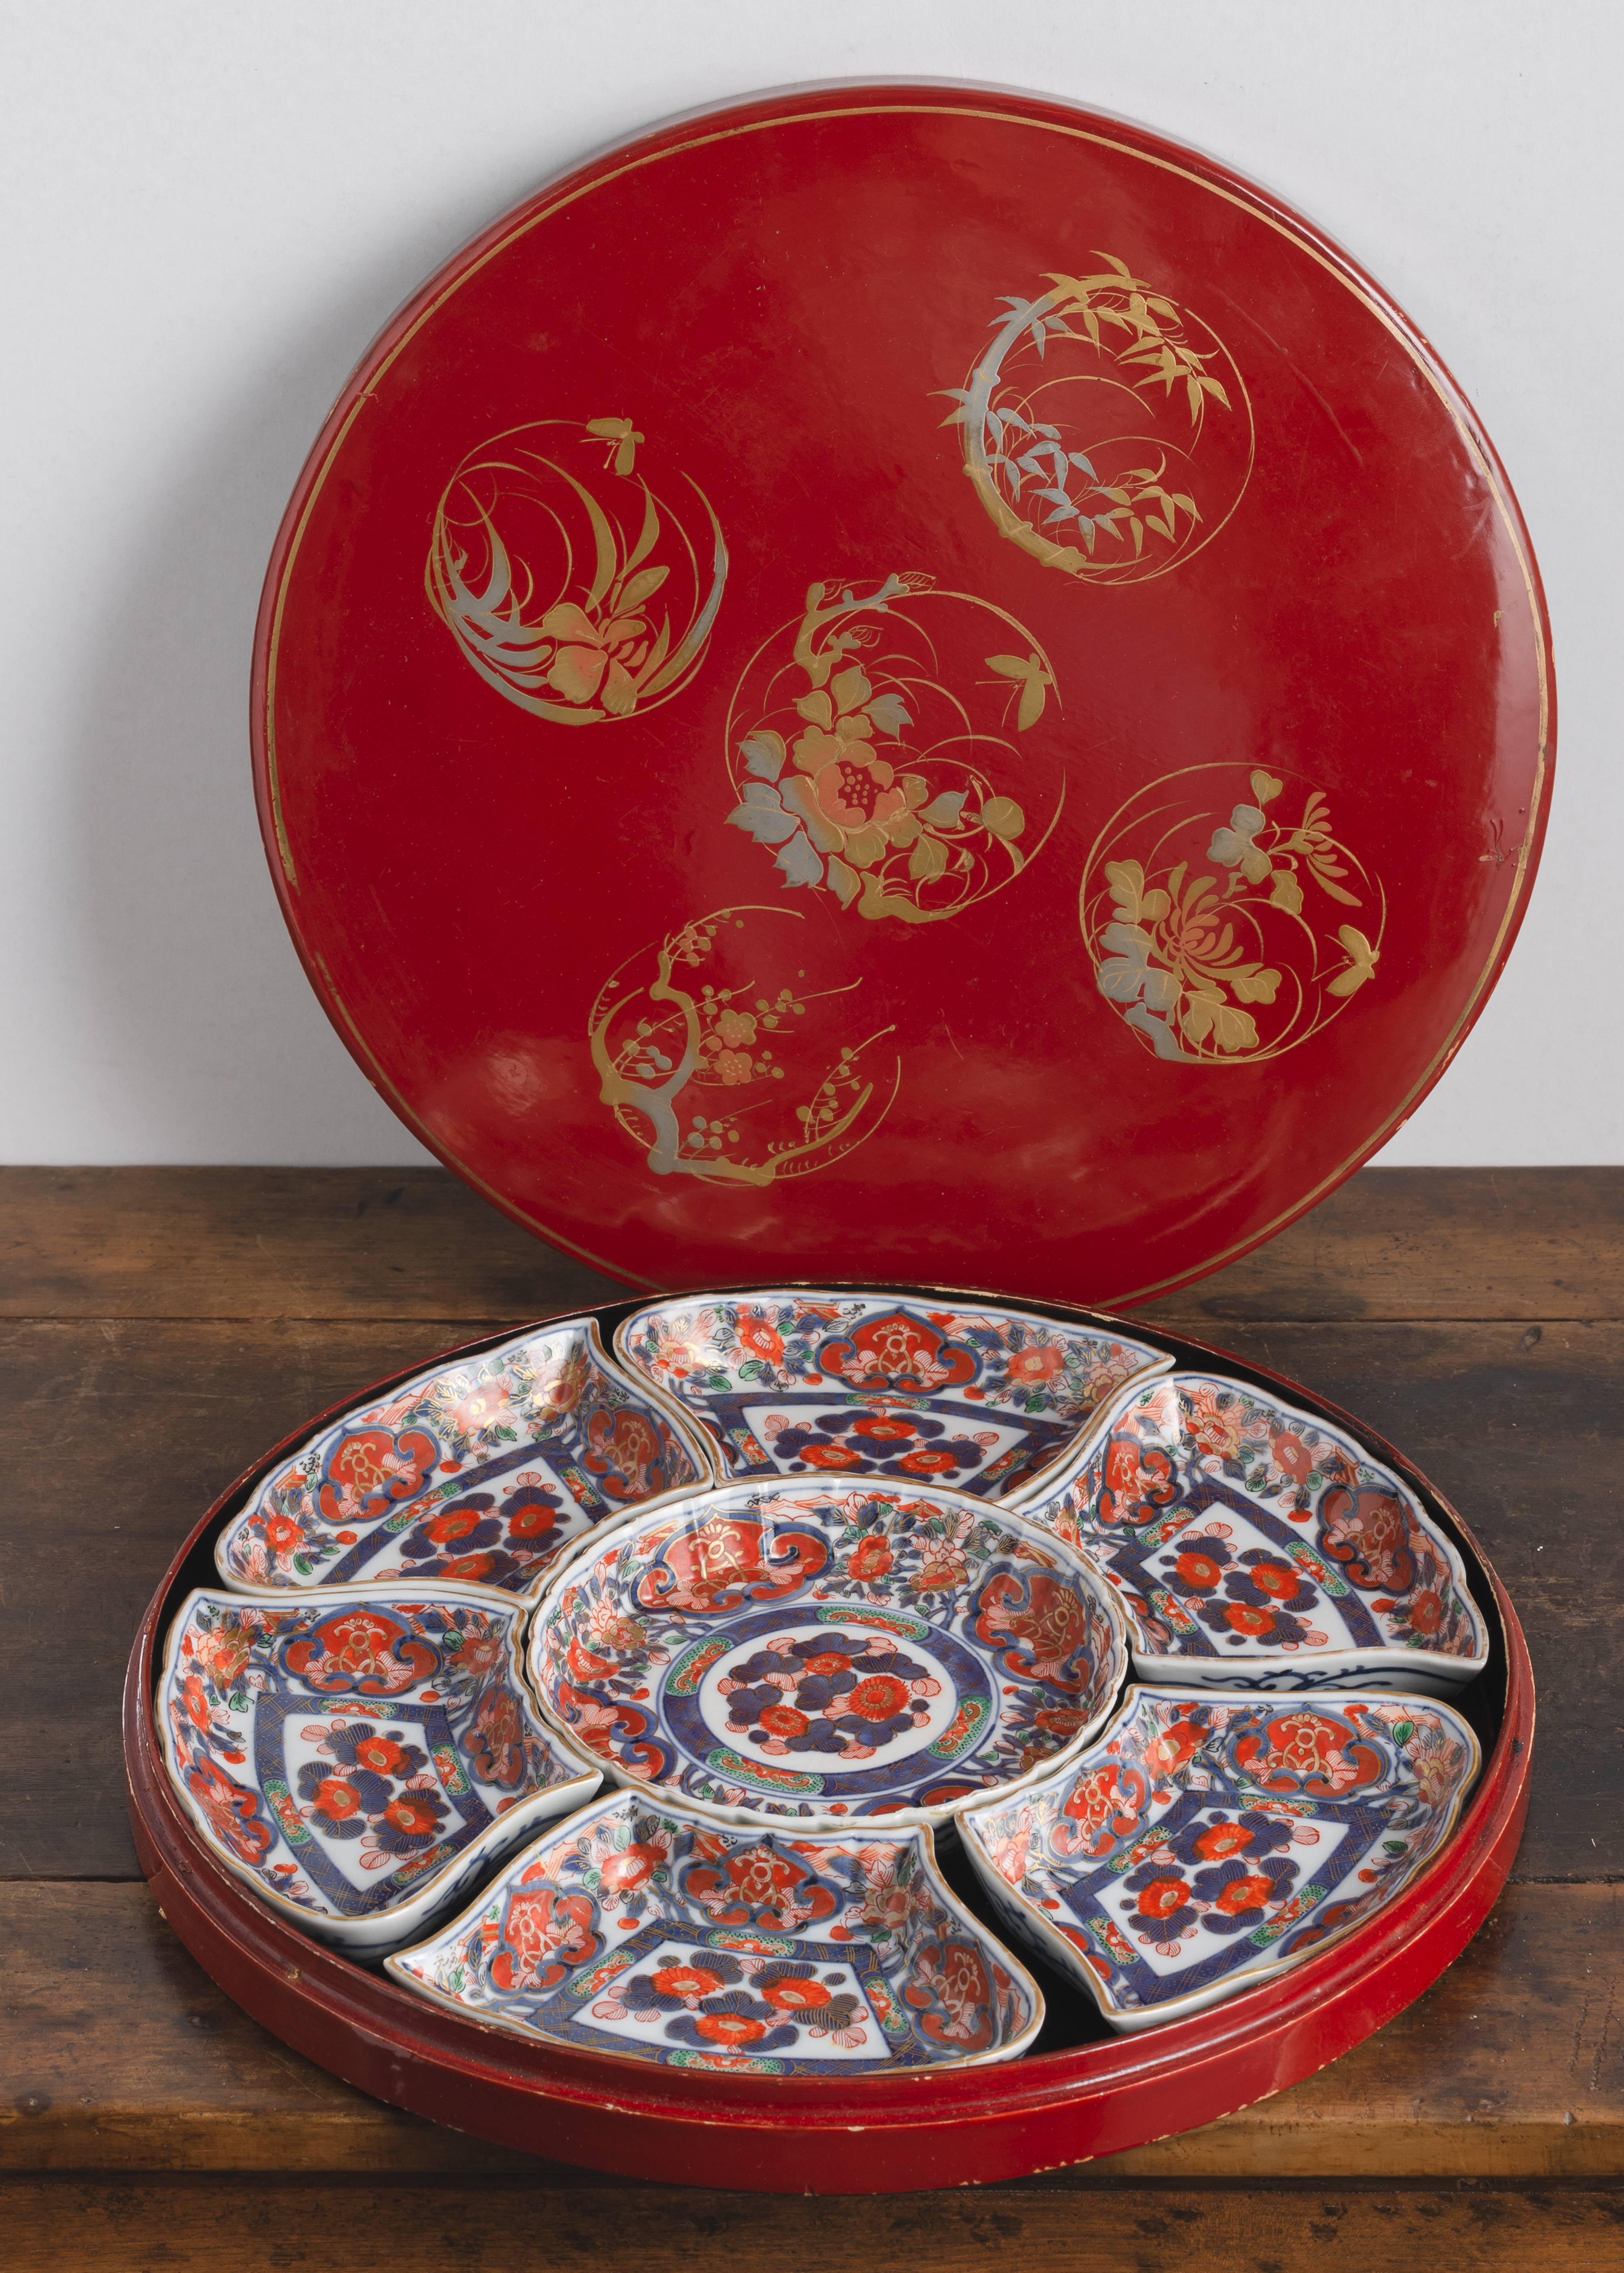 AN 'IMARI' PORCELAIN SWEETMEAT SET IN A LACQUER BOX - Image 2 of 4